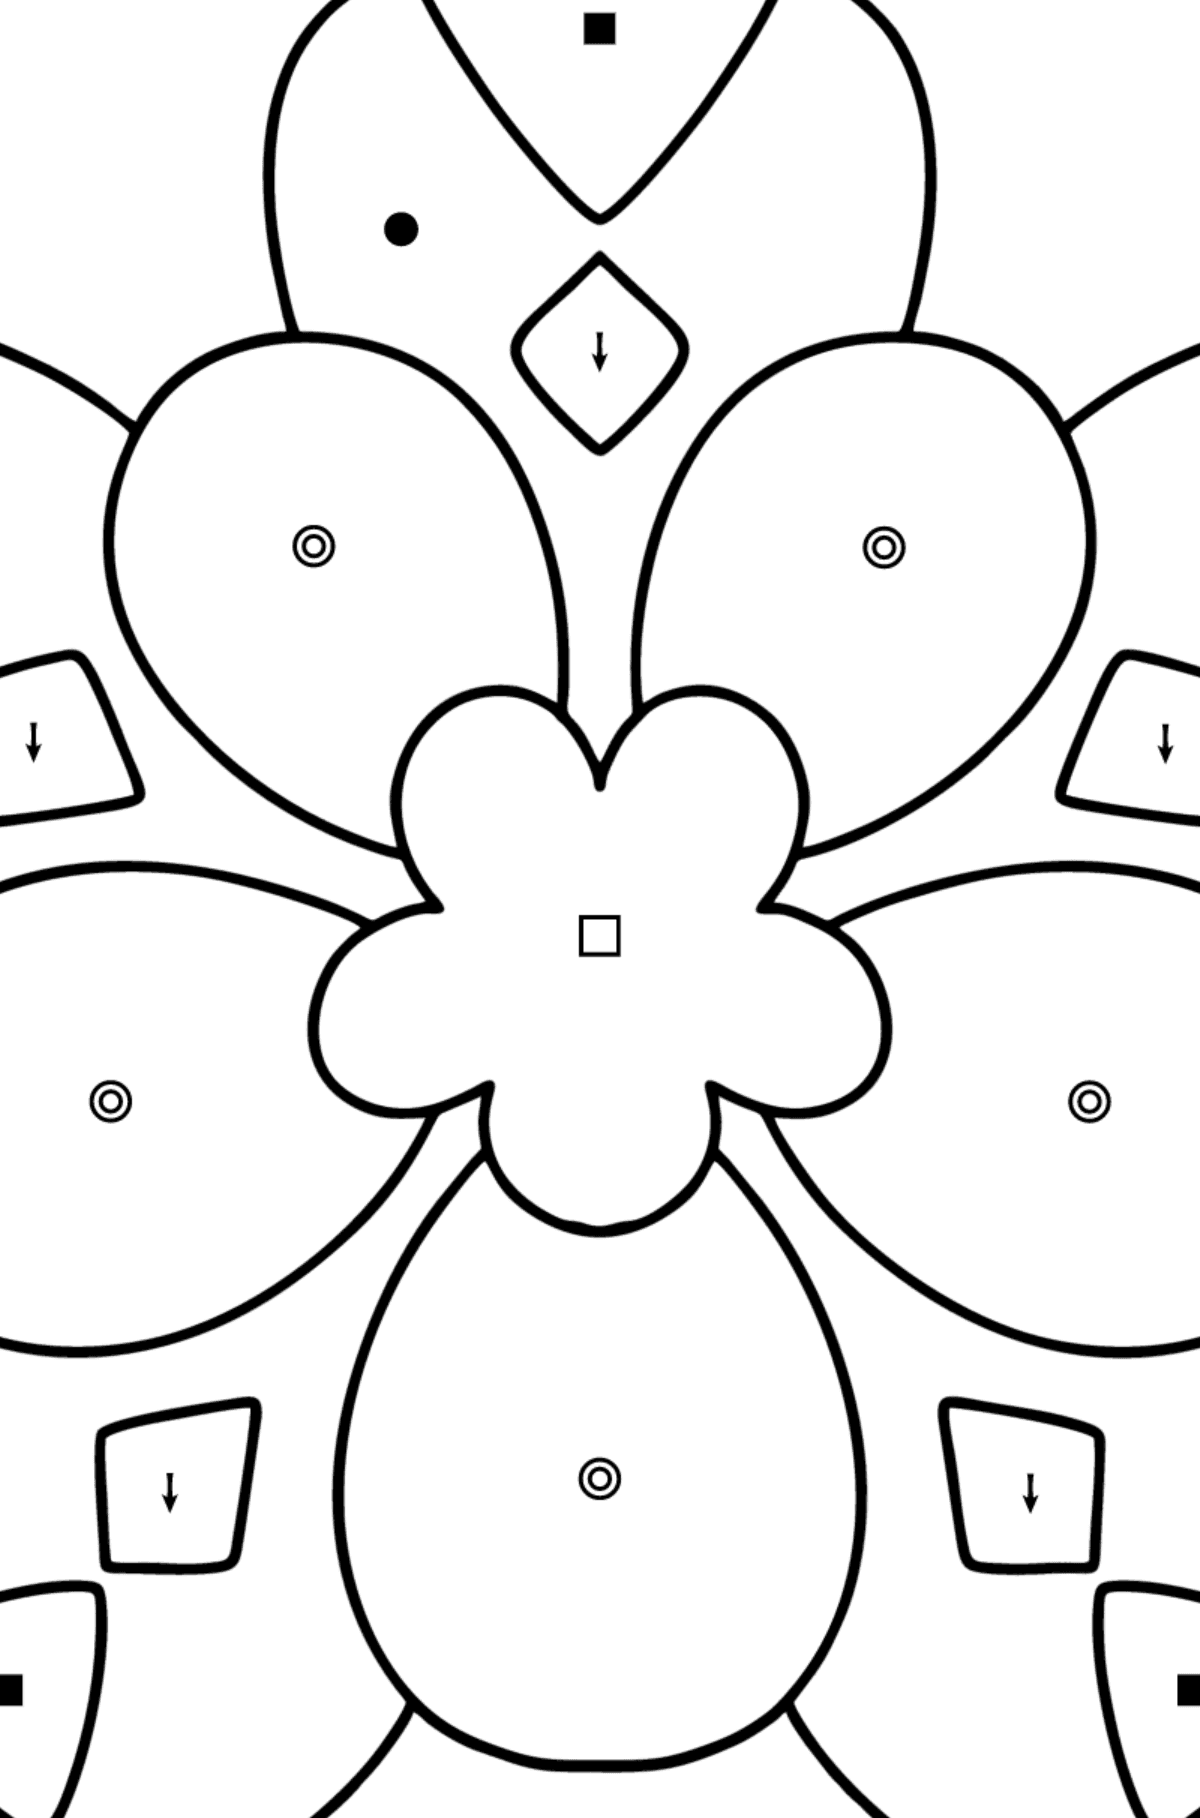 Anti stress Heart coloring page - Coloring by Symbols and Geometric Shapes for Kids